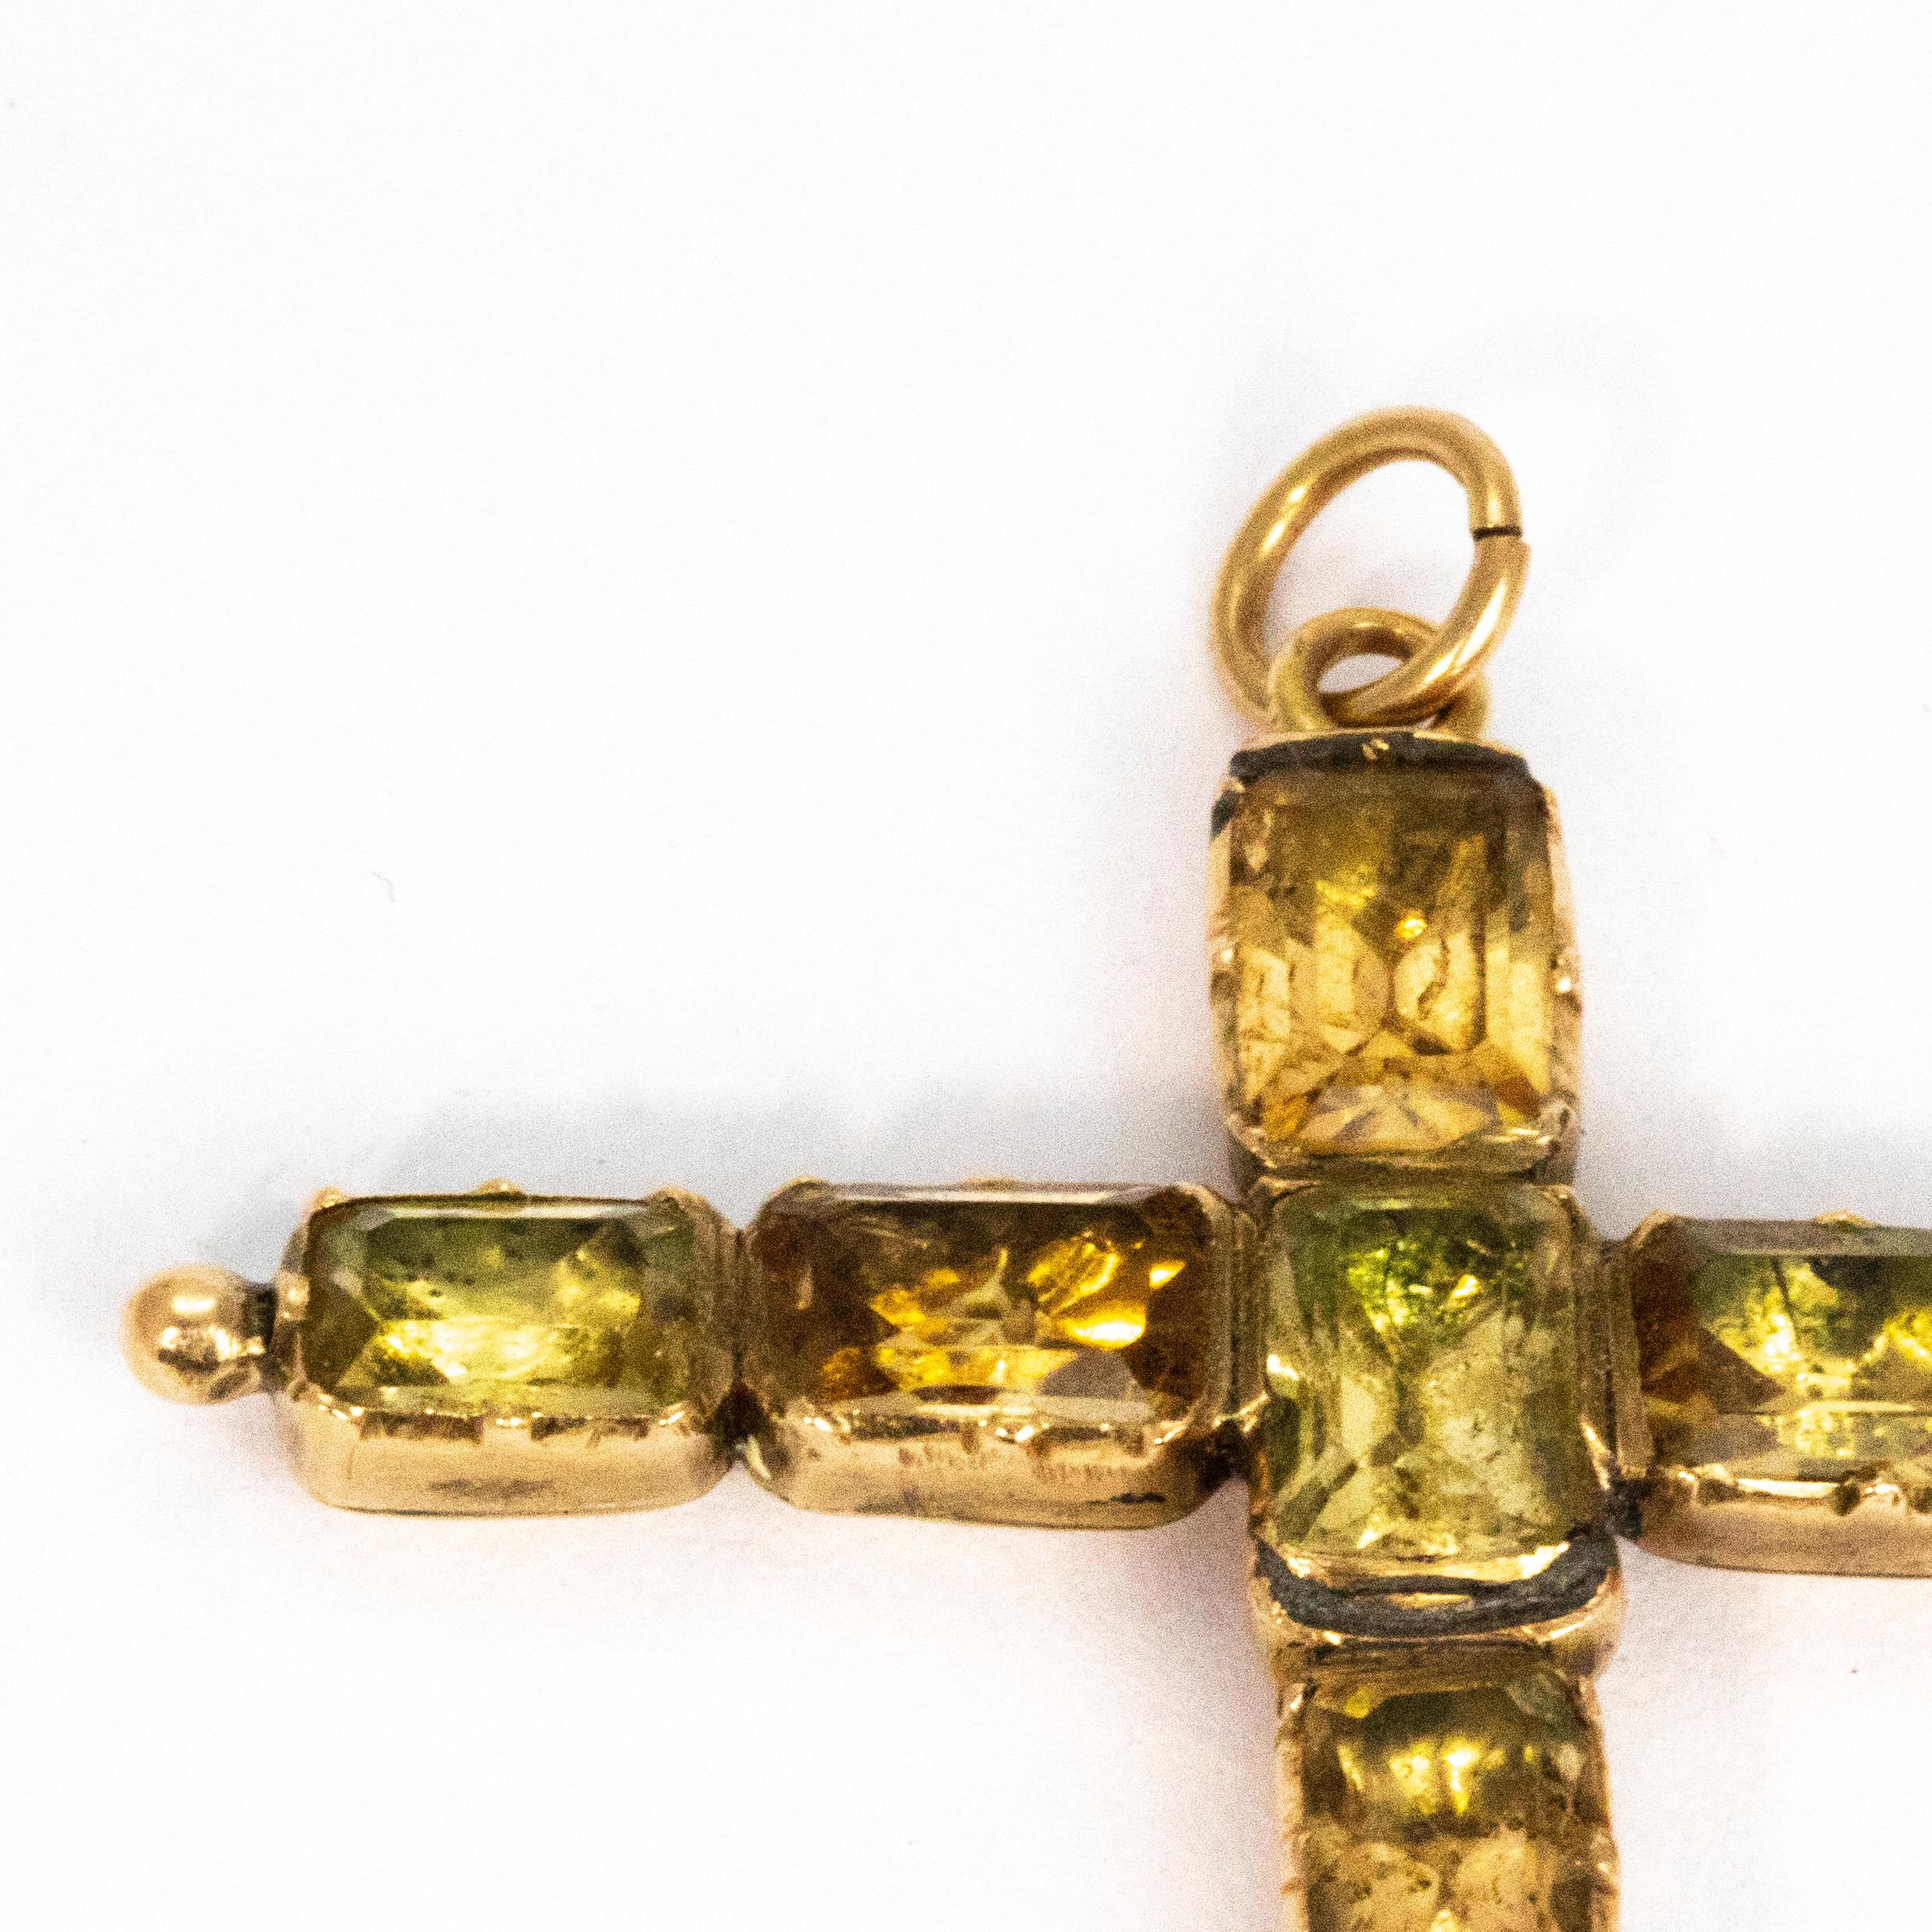 This gorgeous cross pendant golds a total of nine citrine stones measuring approximately 50pts each. The stones are foiled to create a wonderful reflection of light. The foiled settings create a lovely smooth finish to the back of the pendant which